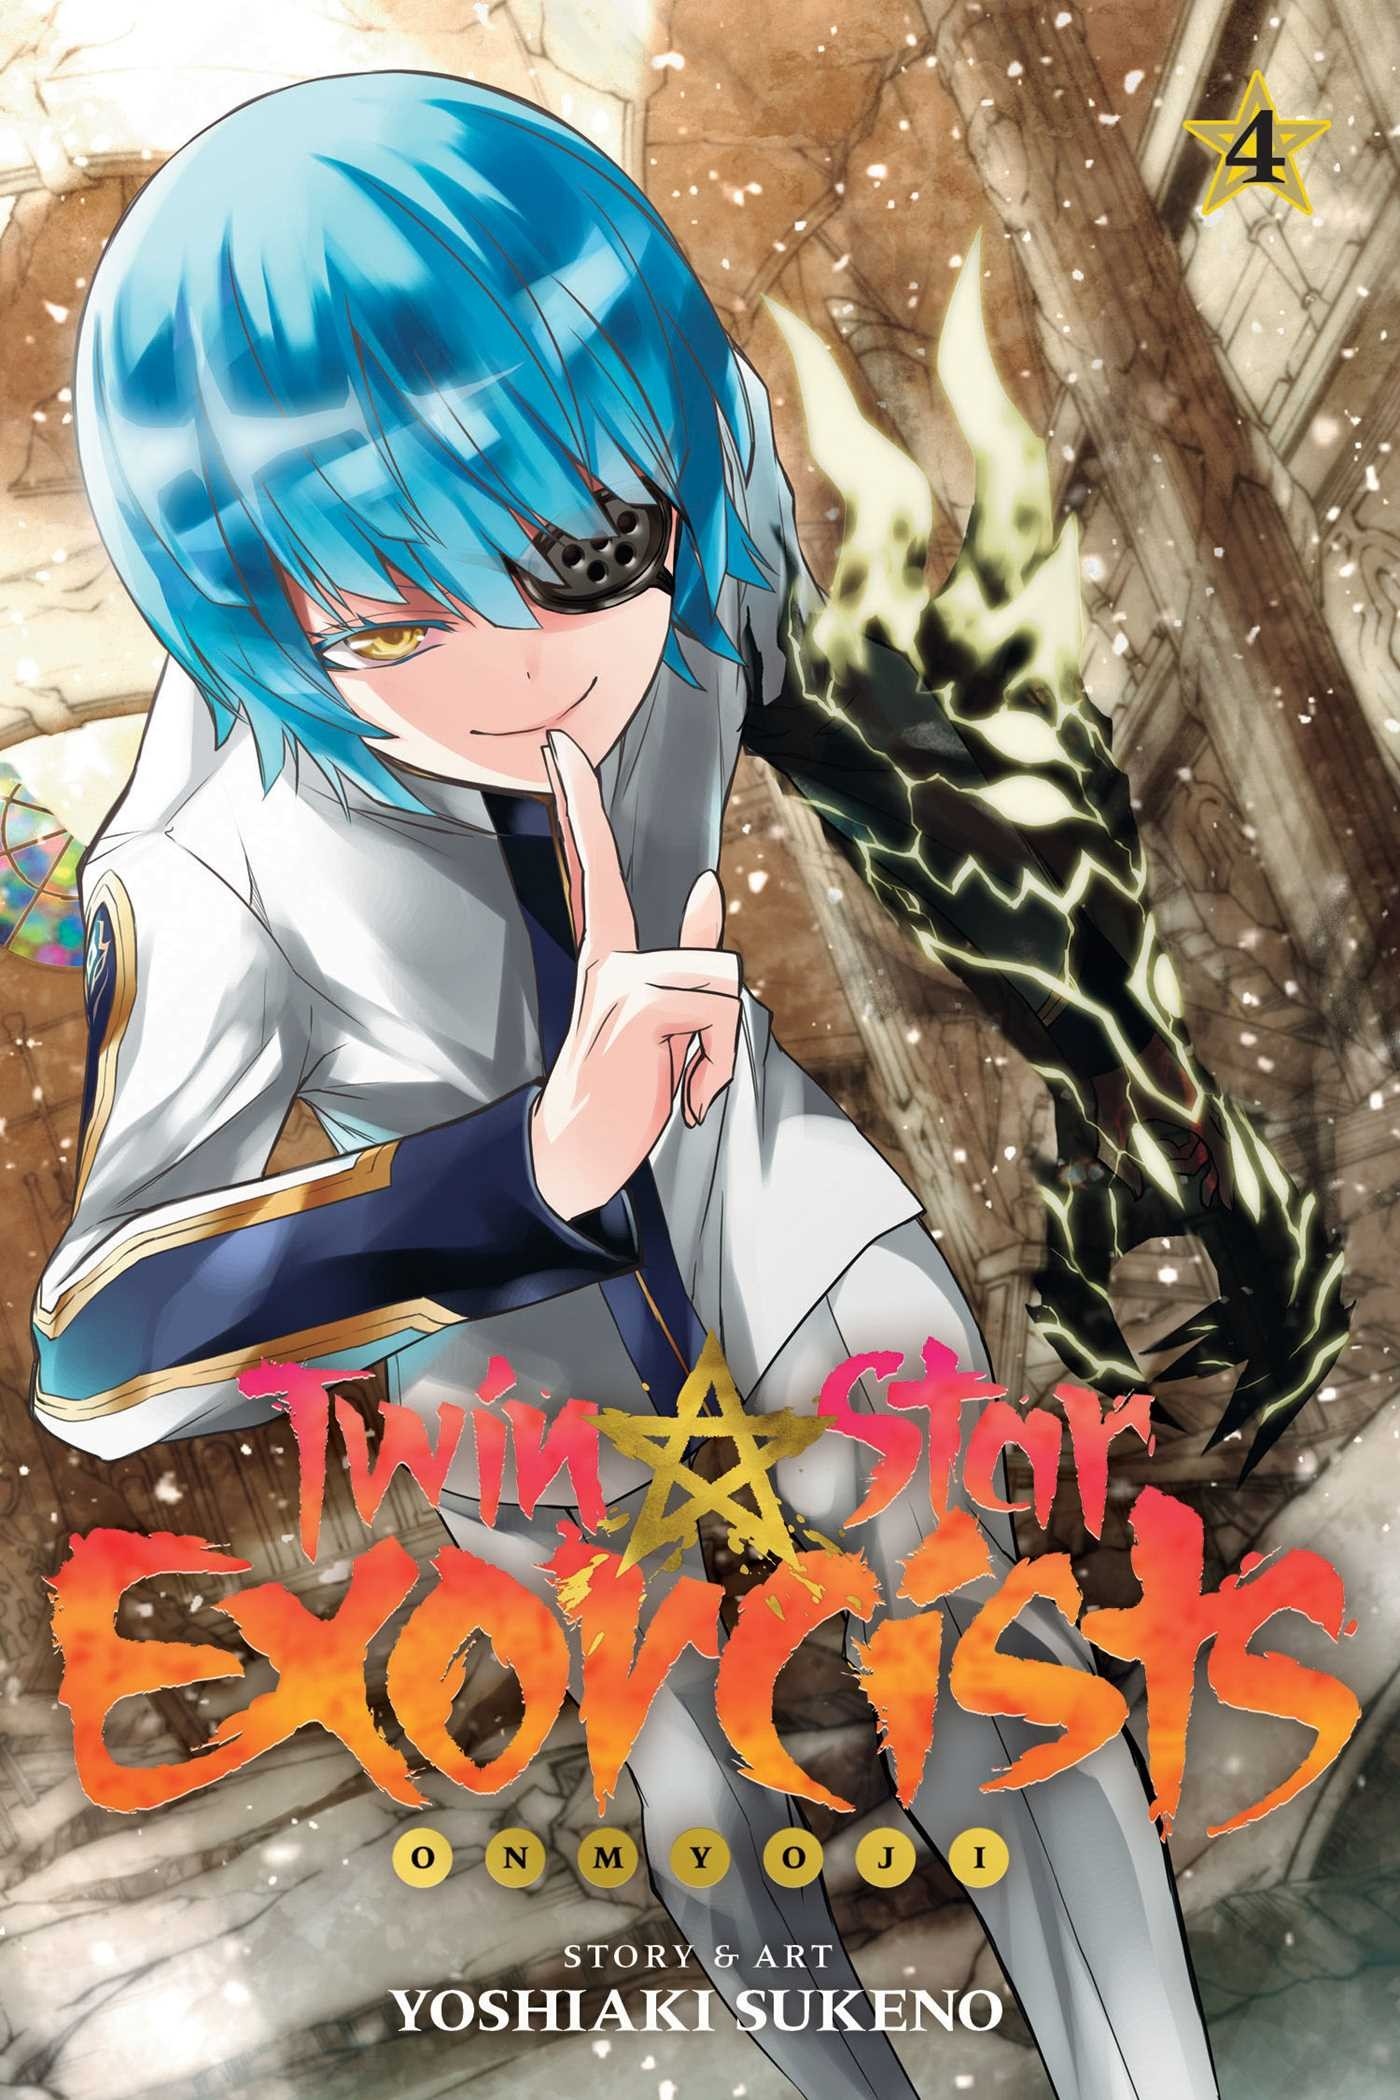 Twin Star Exorcists, Vol. 04